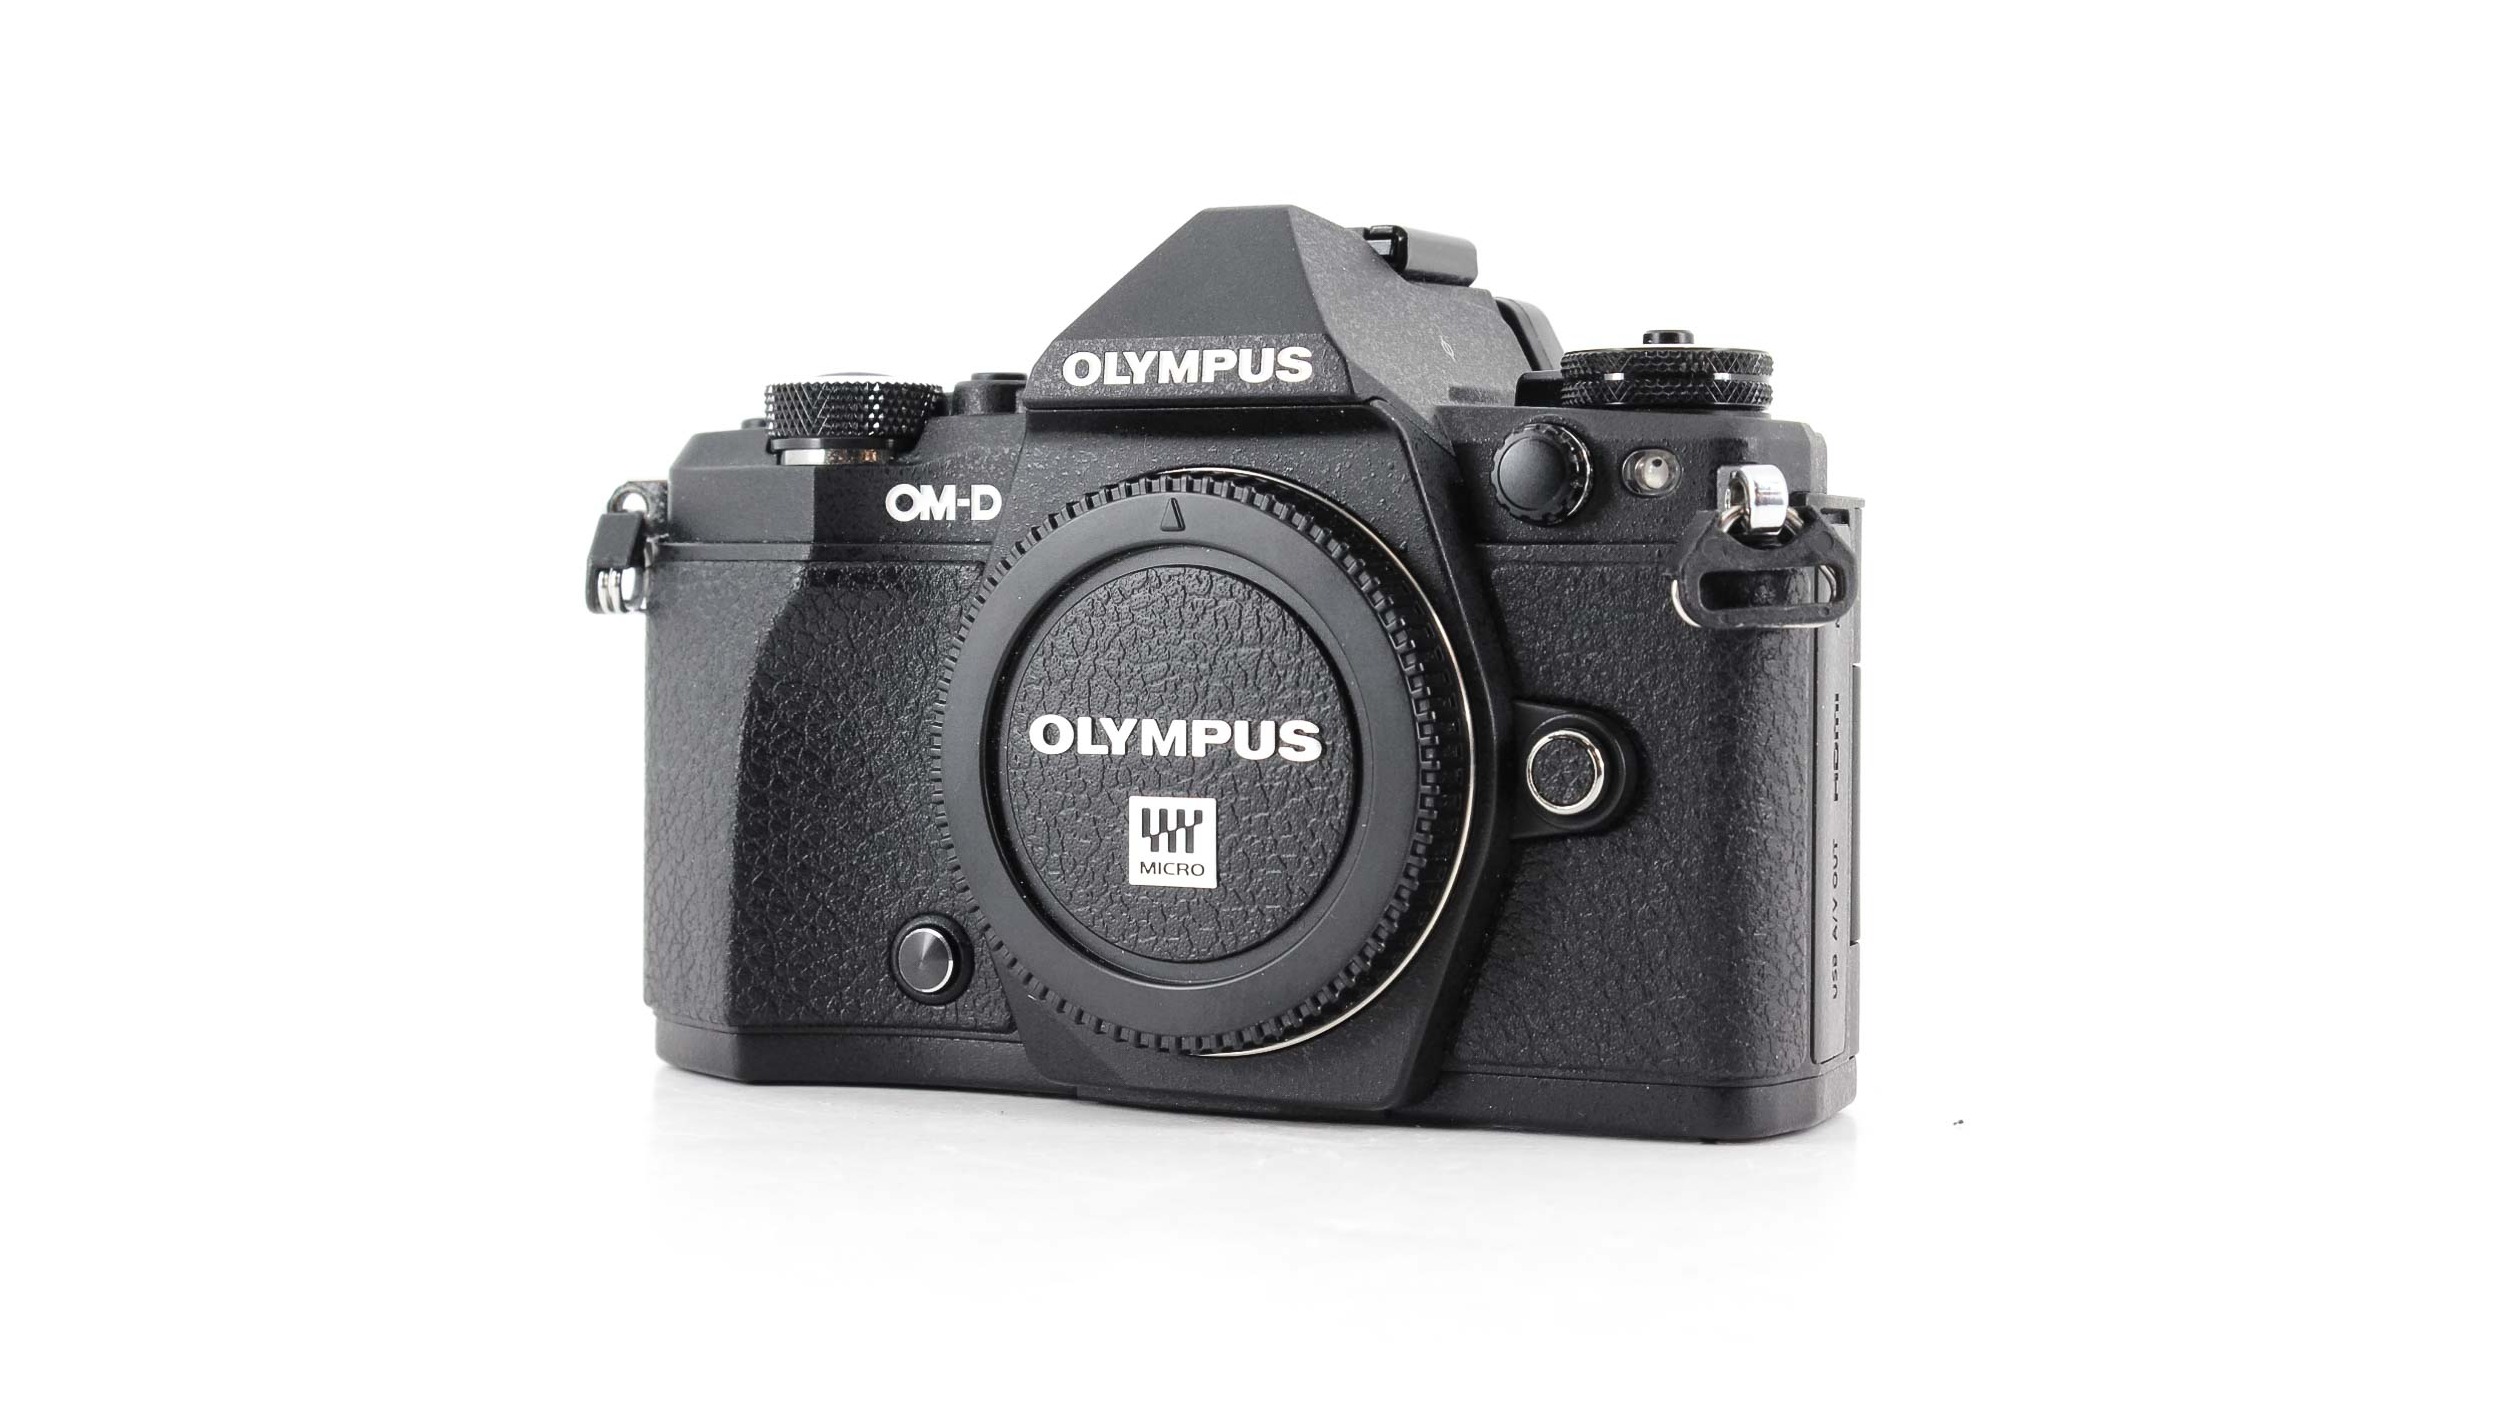 Product photo of the Olympus OM-D E-M5 Mark II